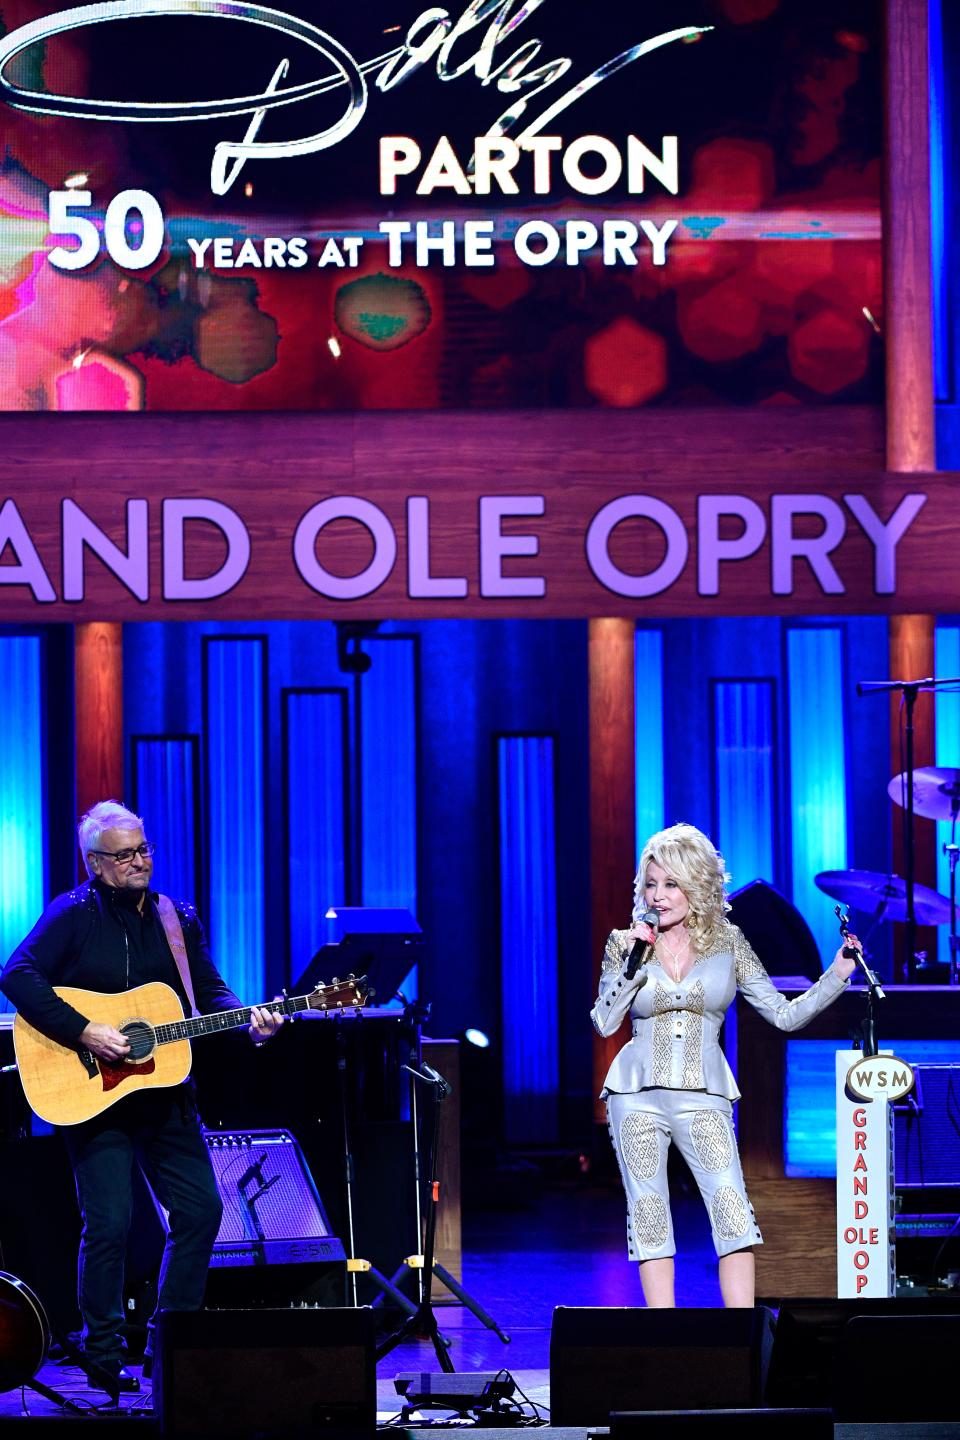 Dolly Parton performs at the 50th anniversary of her induction into the Grand Ole Opry in 2019.